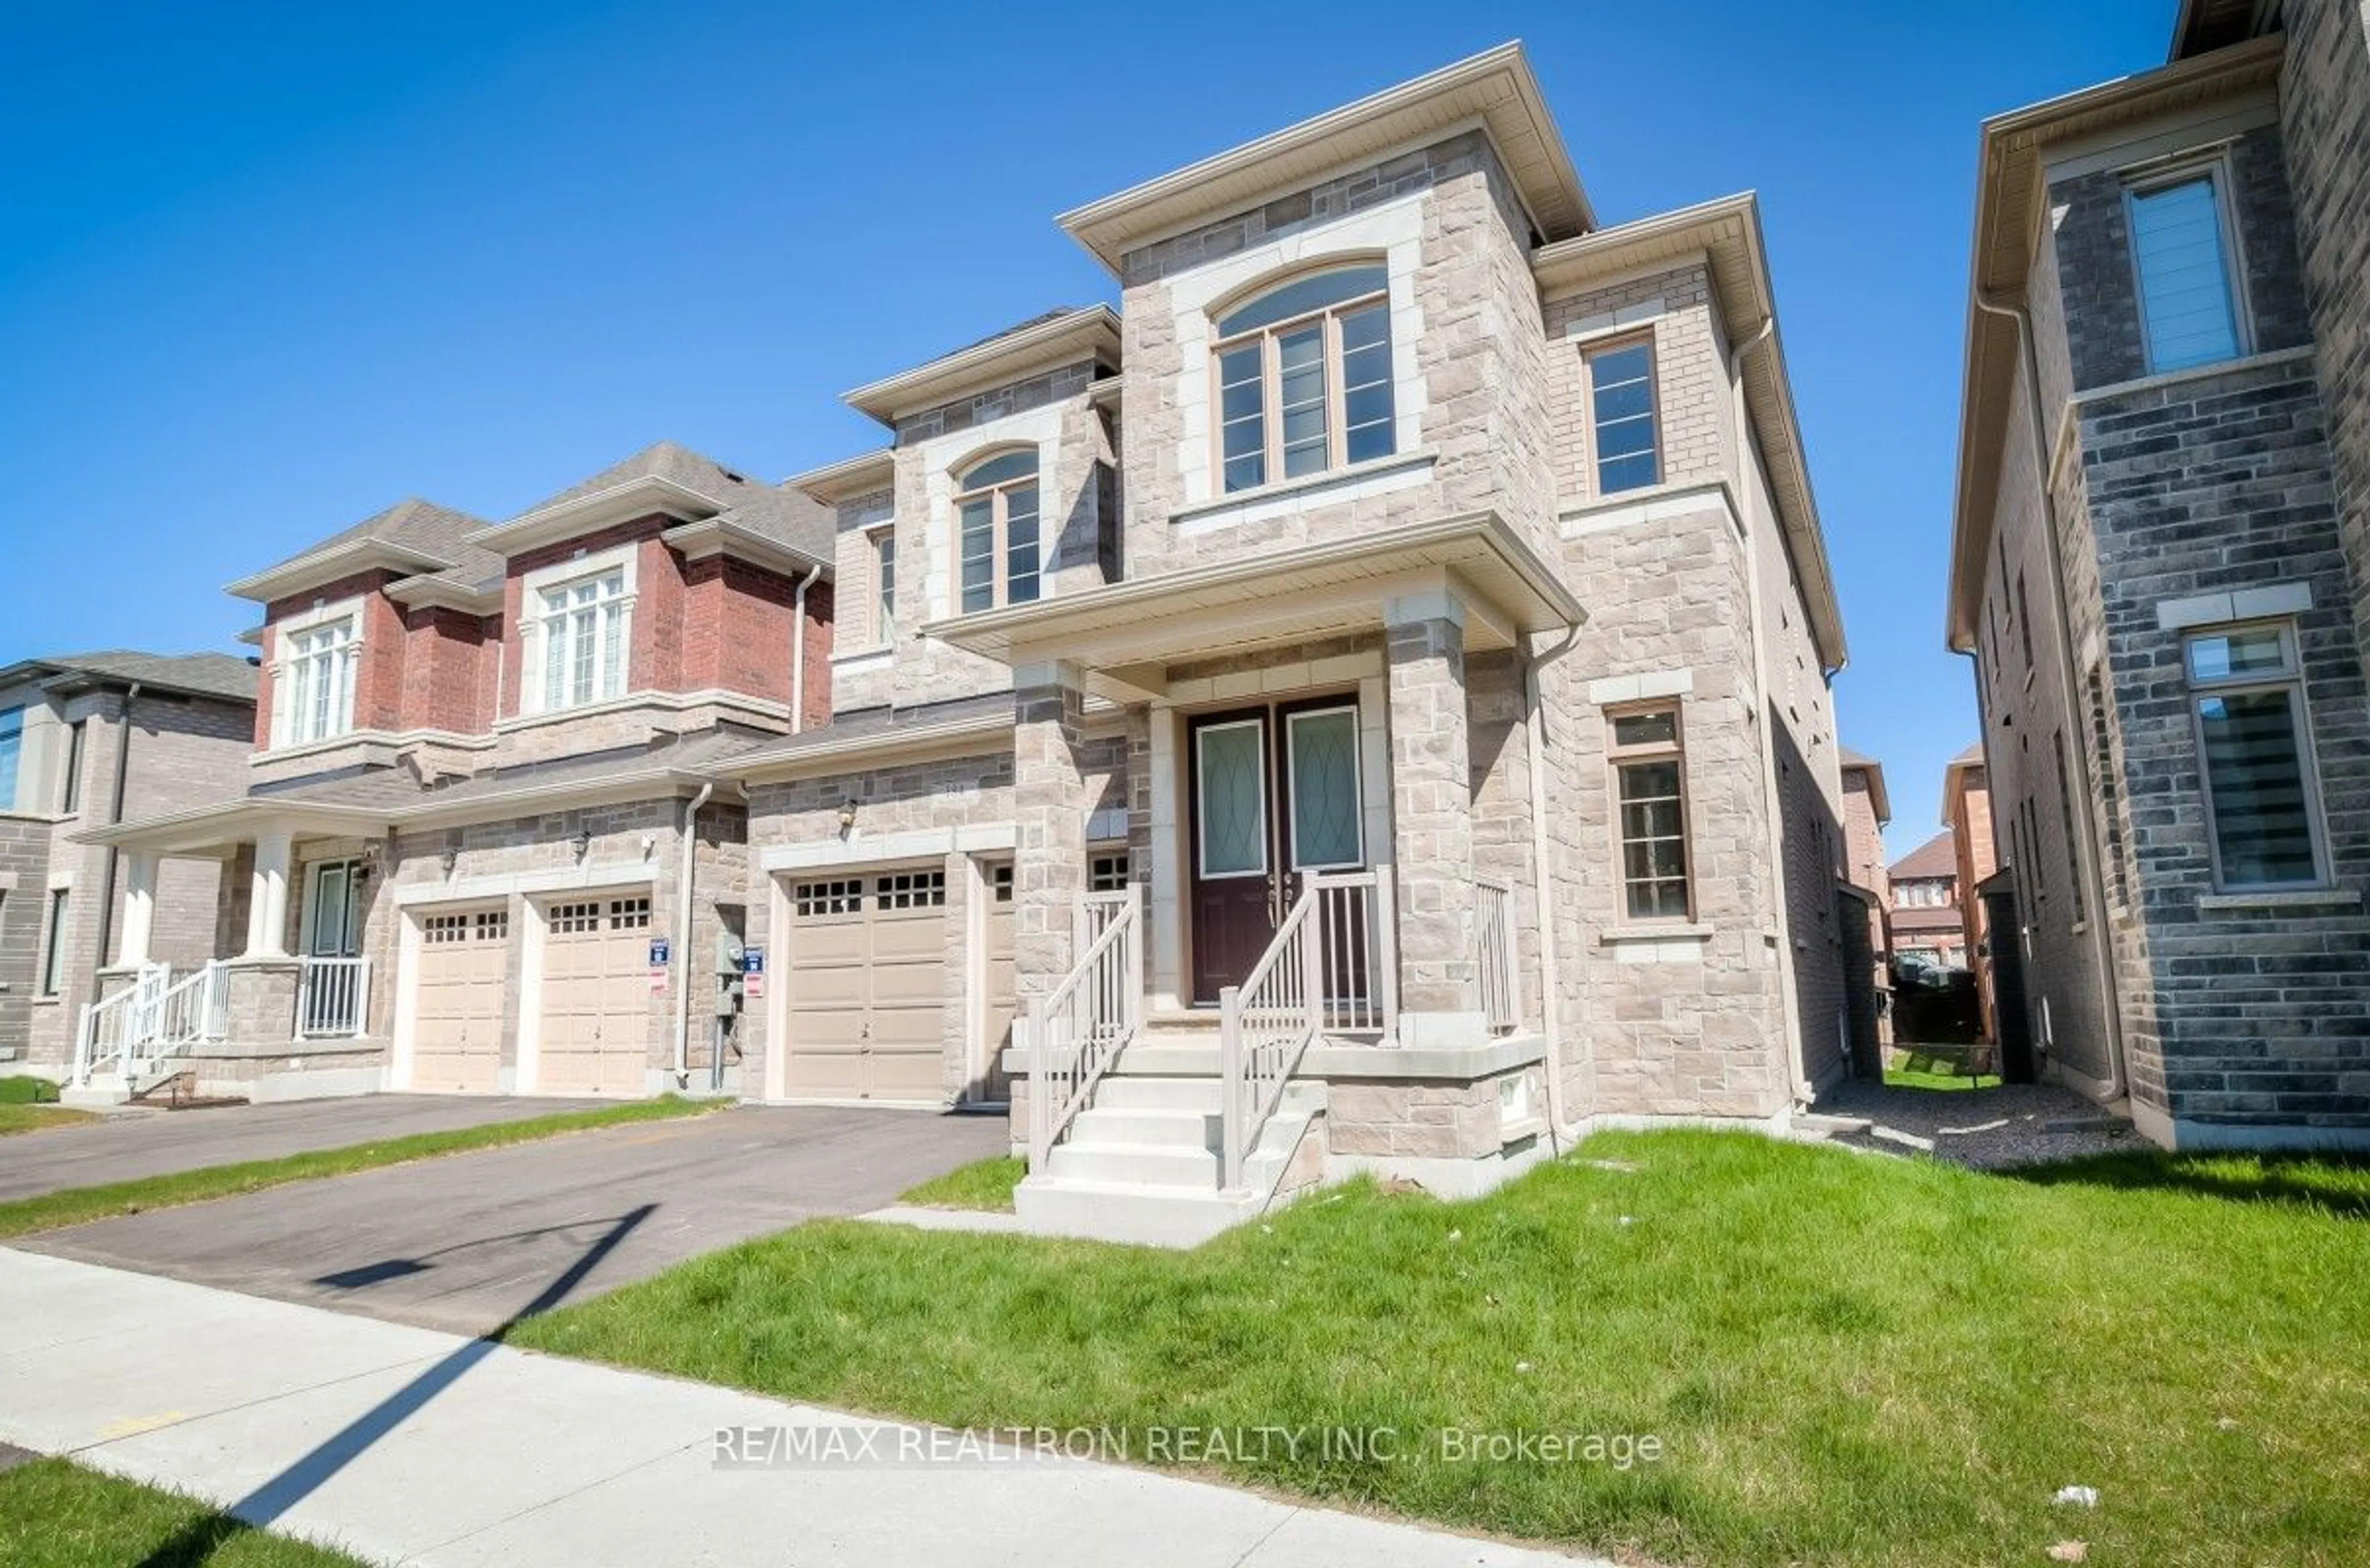 Home with brick exterior material for 184 Wesmina Ave, Whitchurch-Stouffville Ontario L4A 5A2